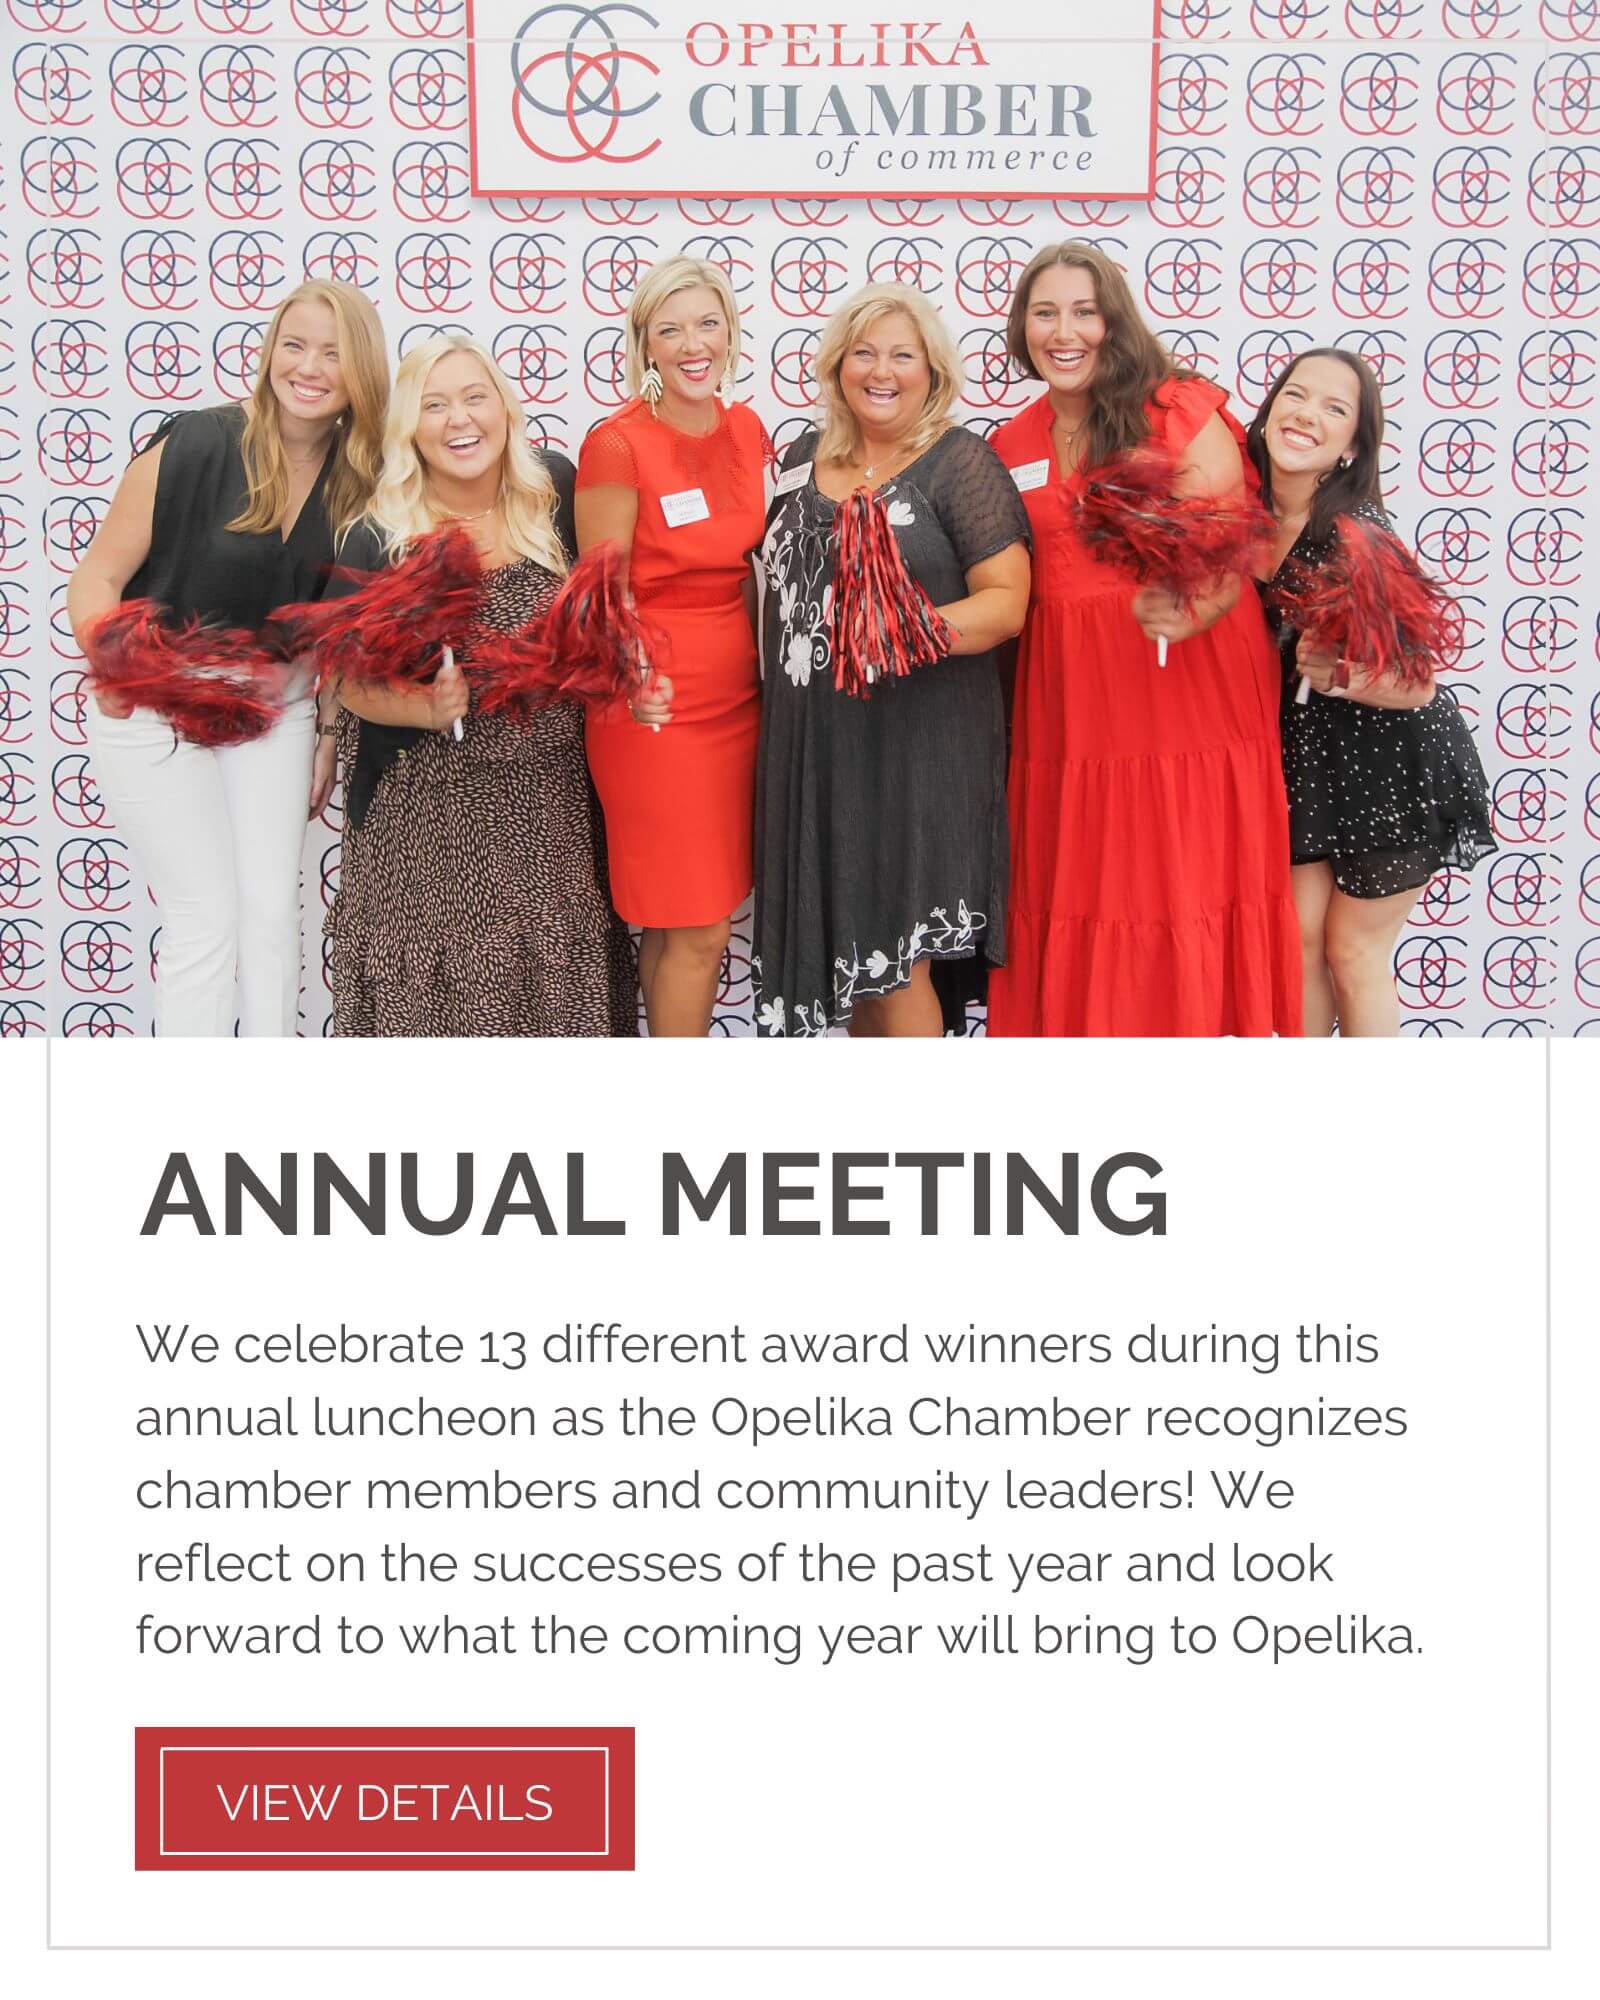 Annual Meeting Premier Event